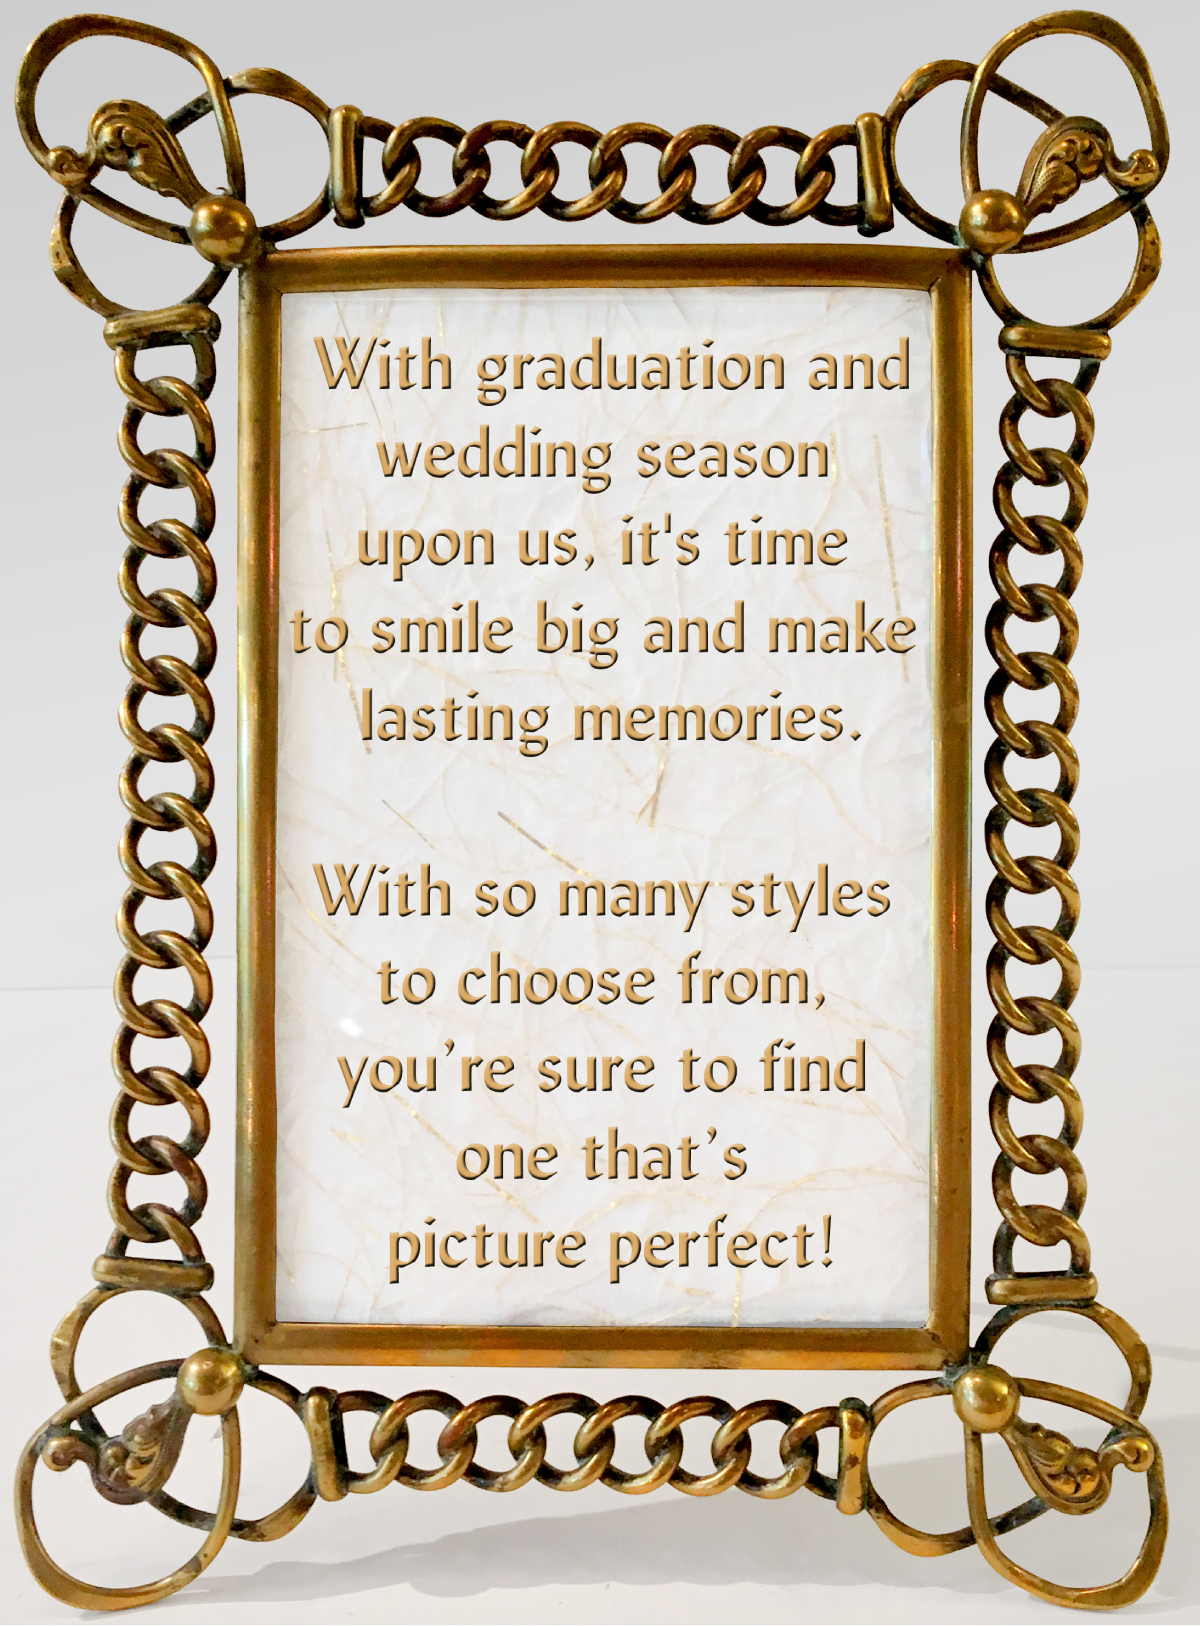 With graduation and wedding season upon us, it's time to smile big and make lasting memories.  With so many styles to choose from, you’re sure to find one that’s picture perfect!